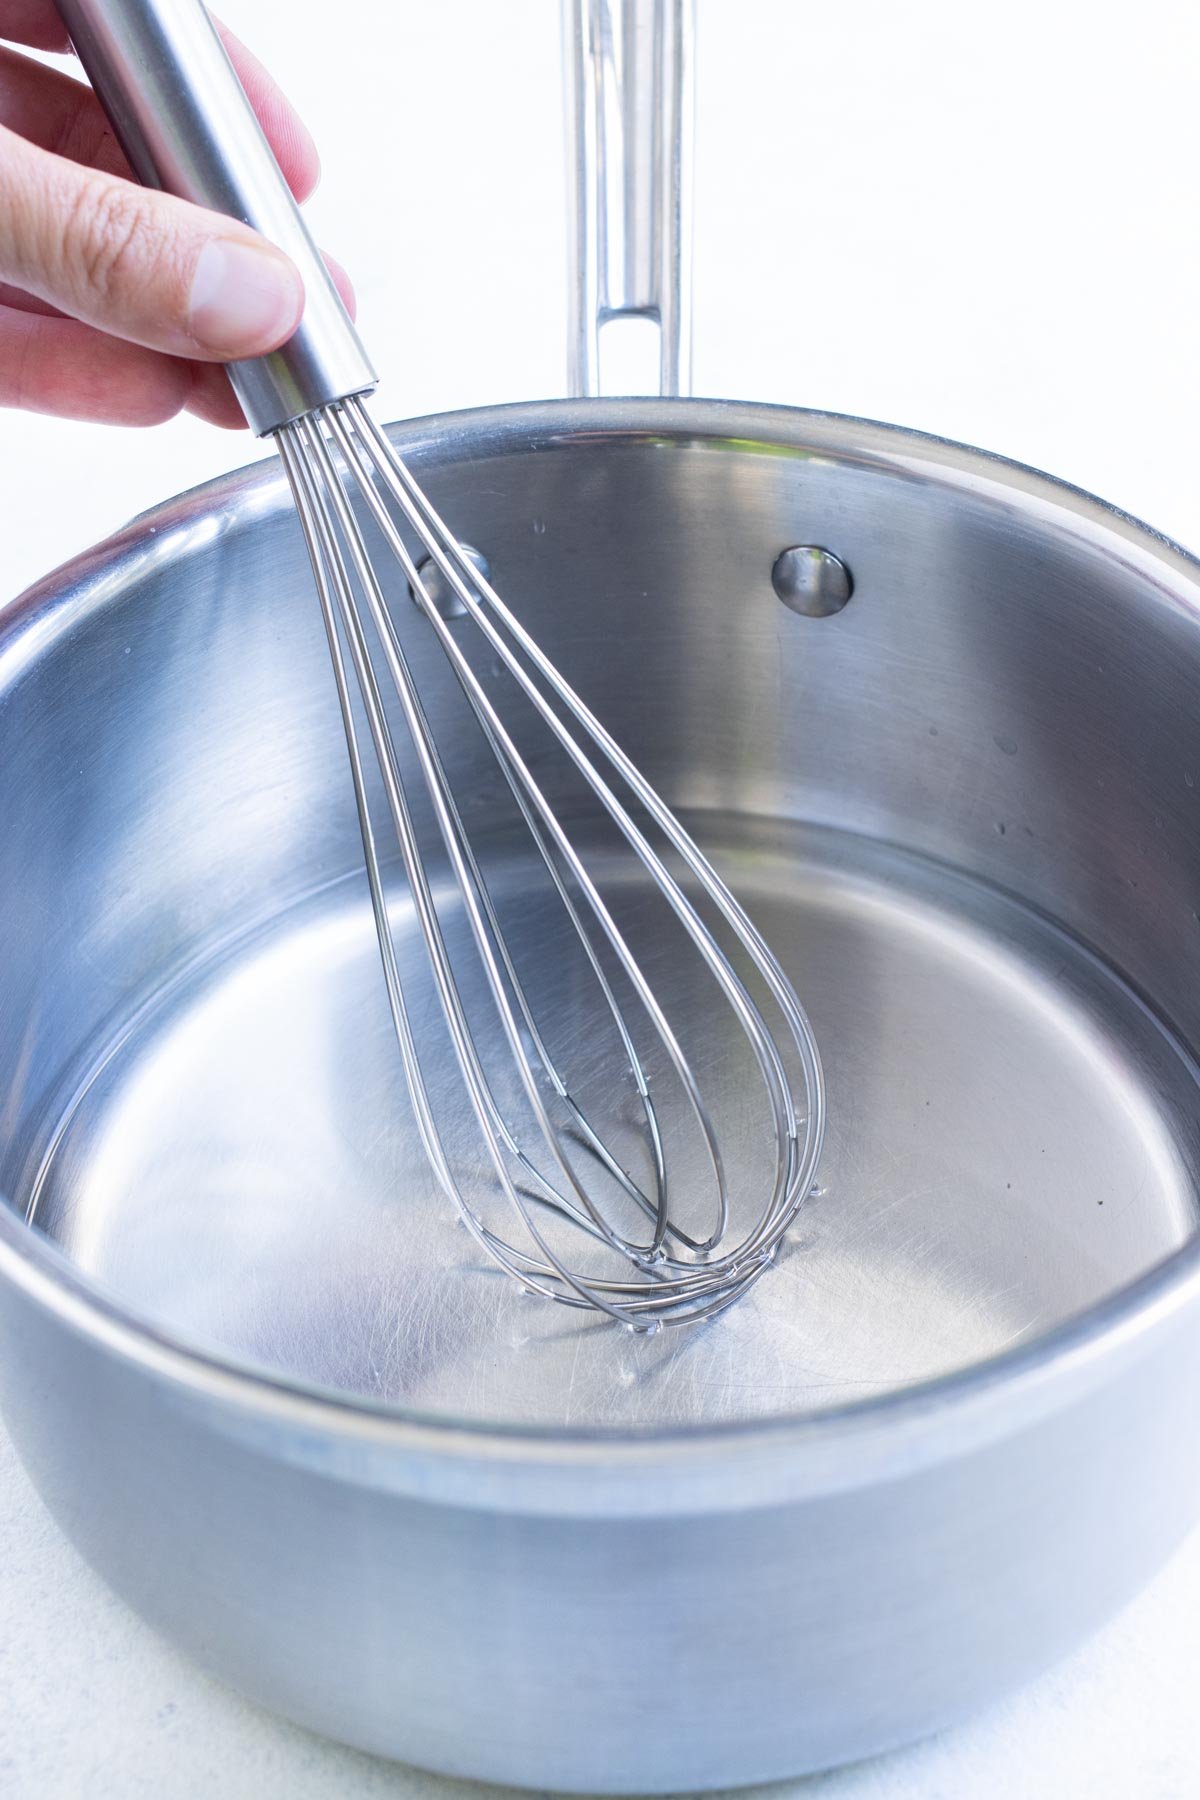 A whisk is used to mix pickling brine.